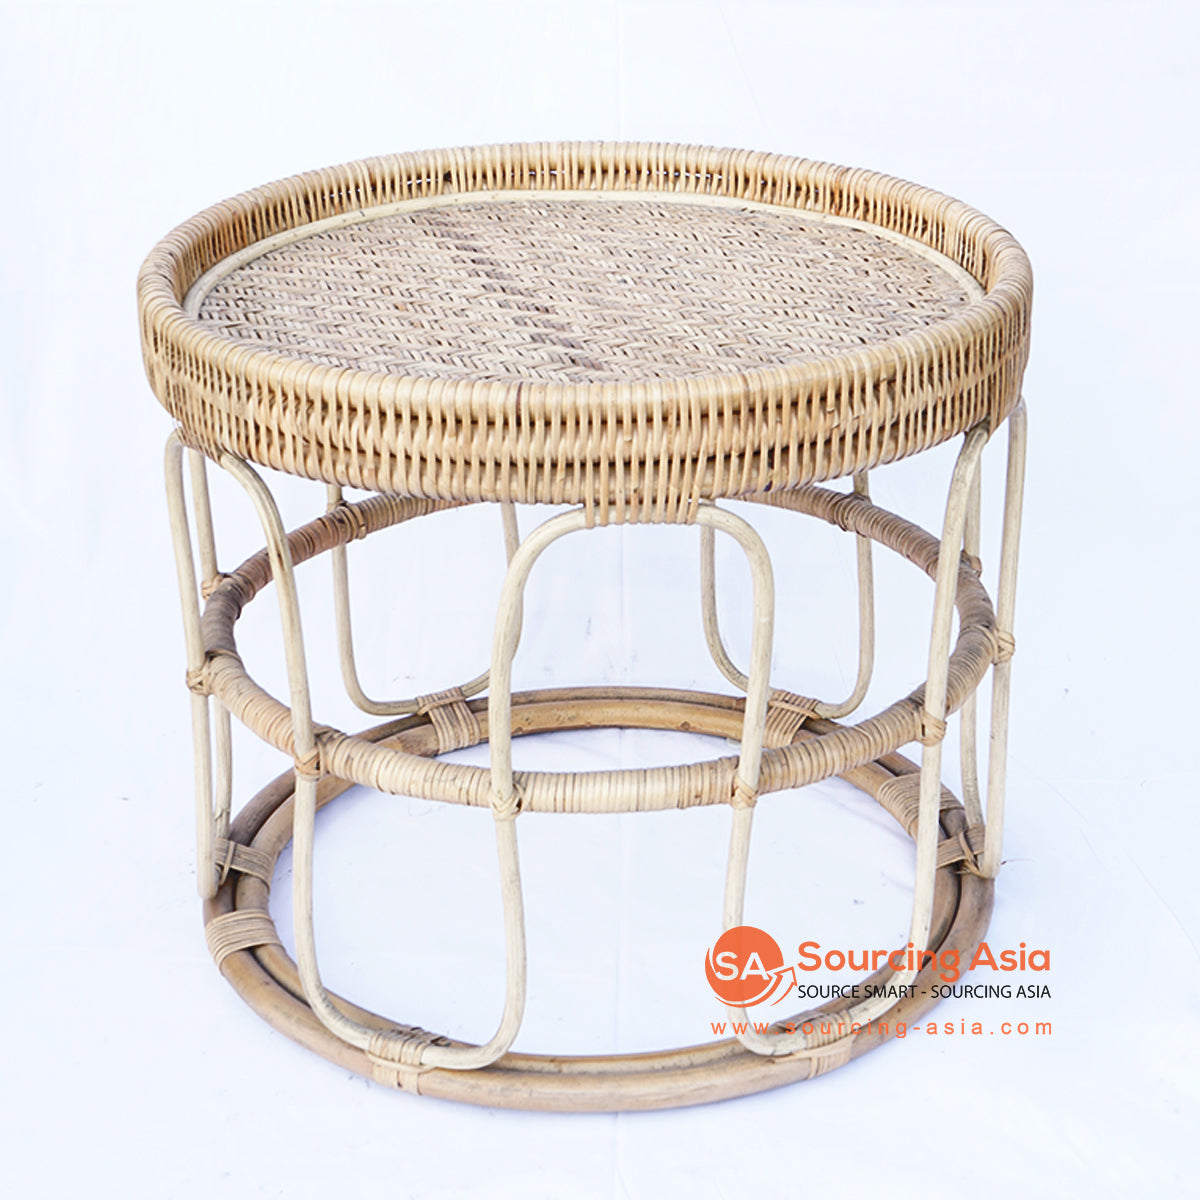 BNTC004-6 NATURAL RATTAN SIDE TABLE